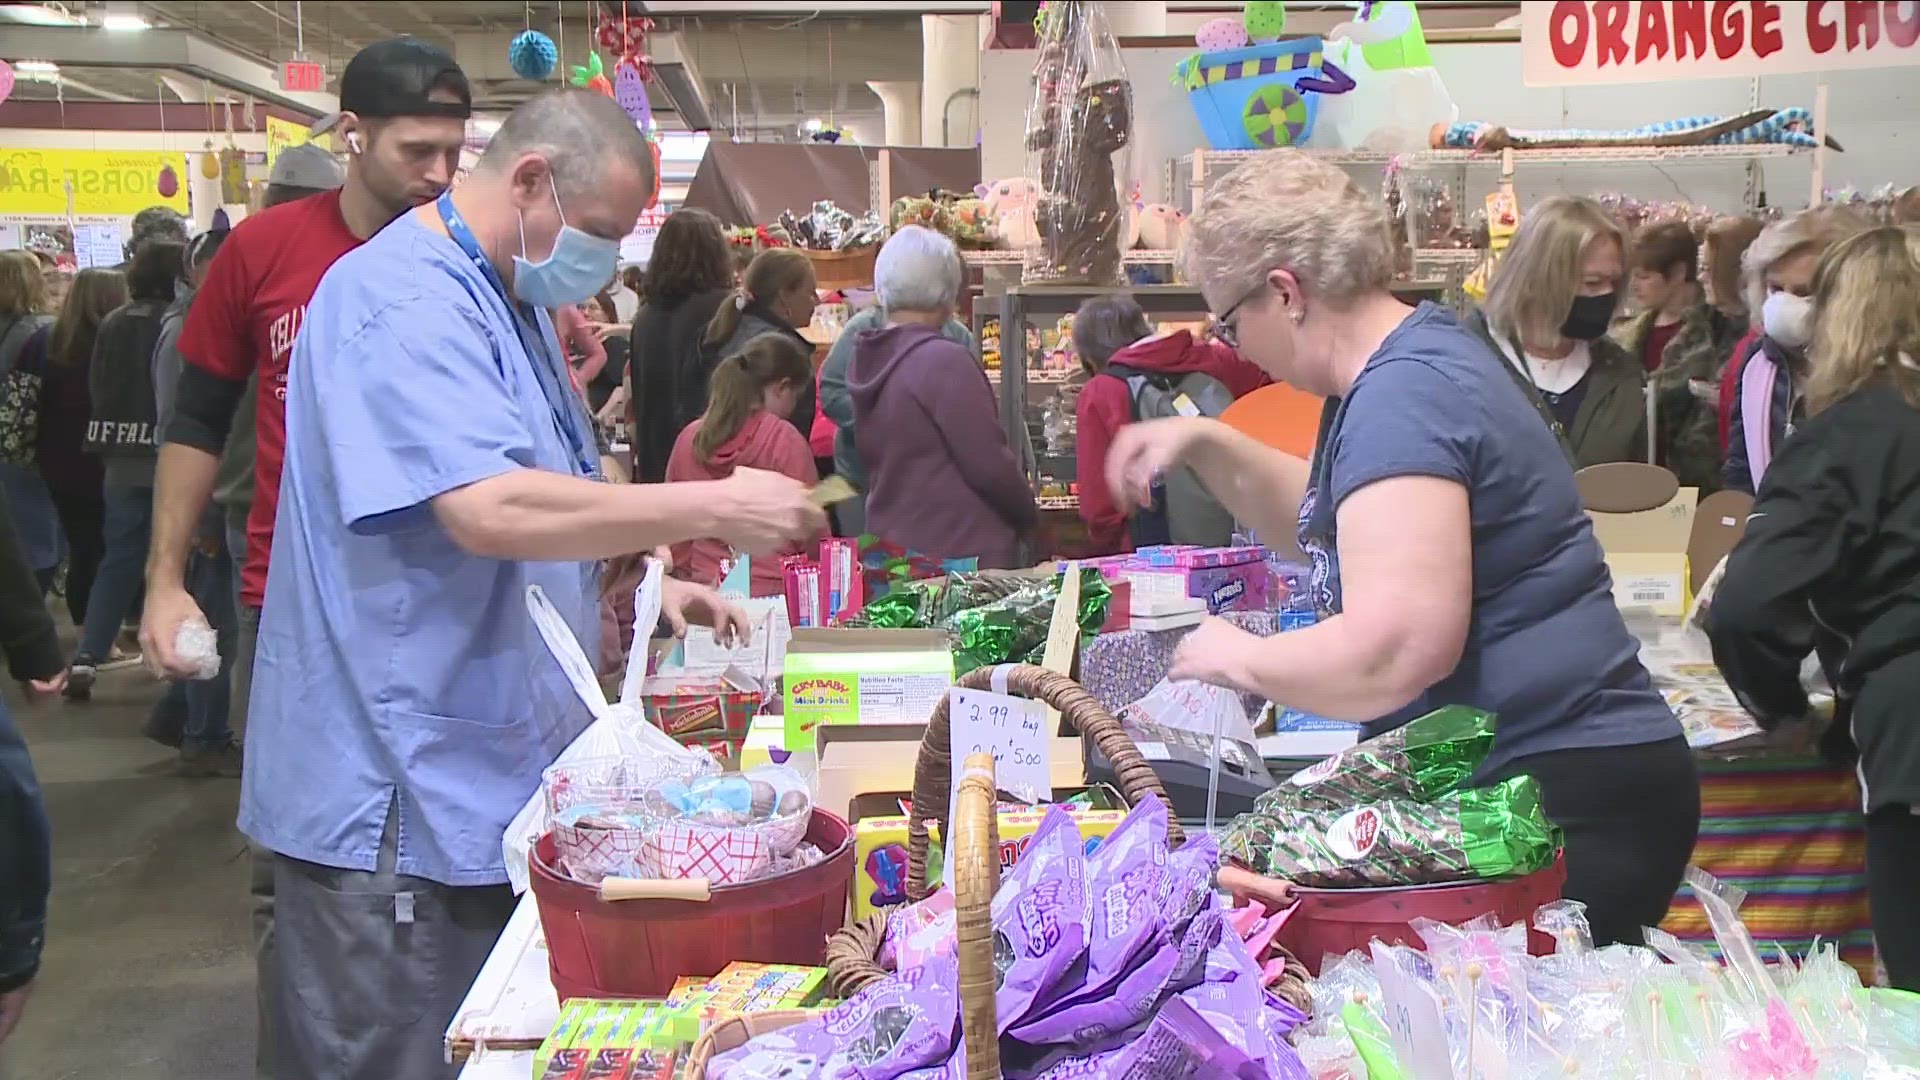 Kevin O'Neill visits the Broadway Market as they get ready for holiday shopping next week.